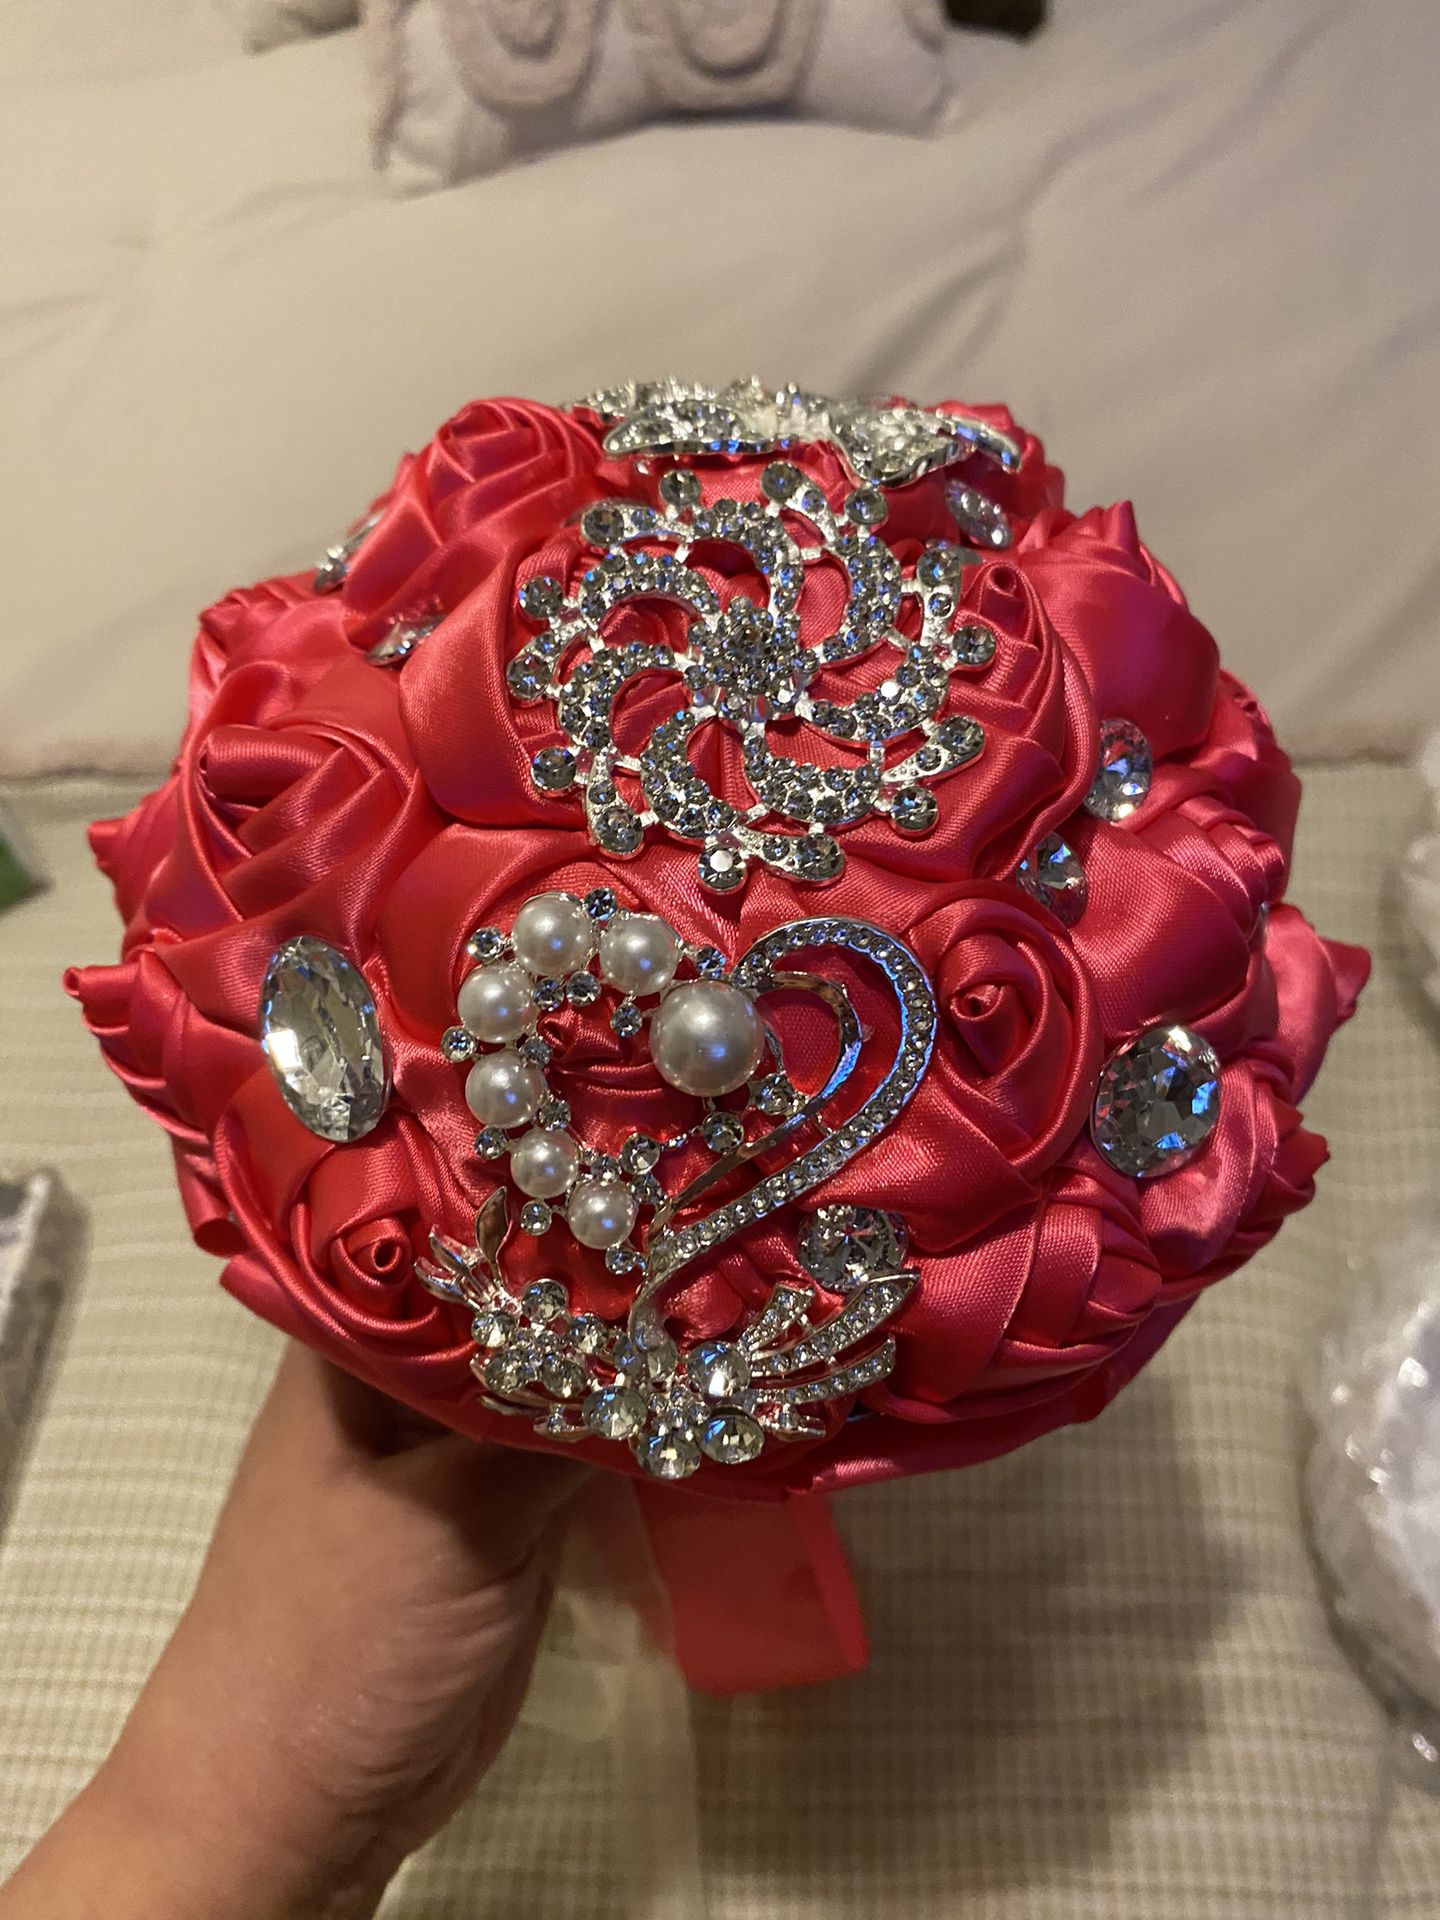 Hot Pink Roses with Bling Accent Jewels Bouquet 